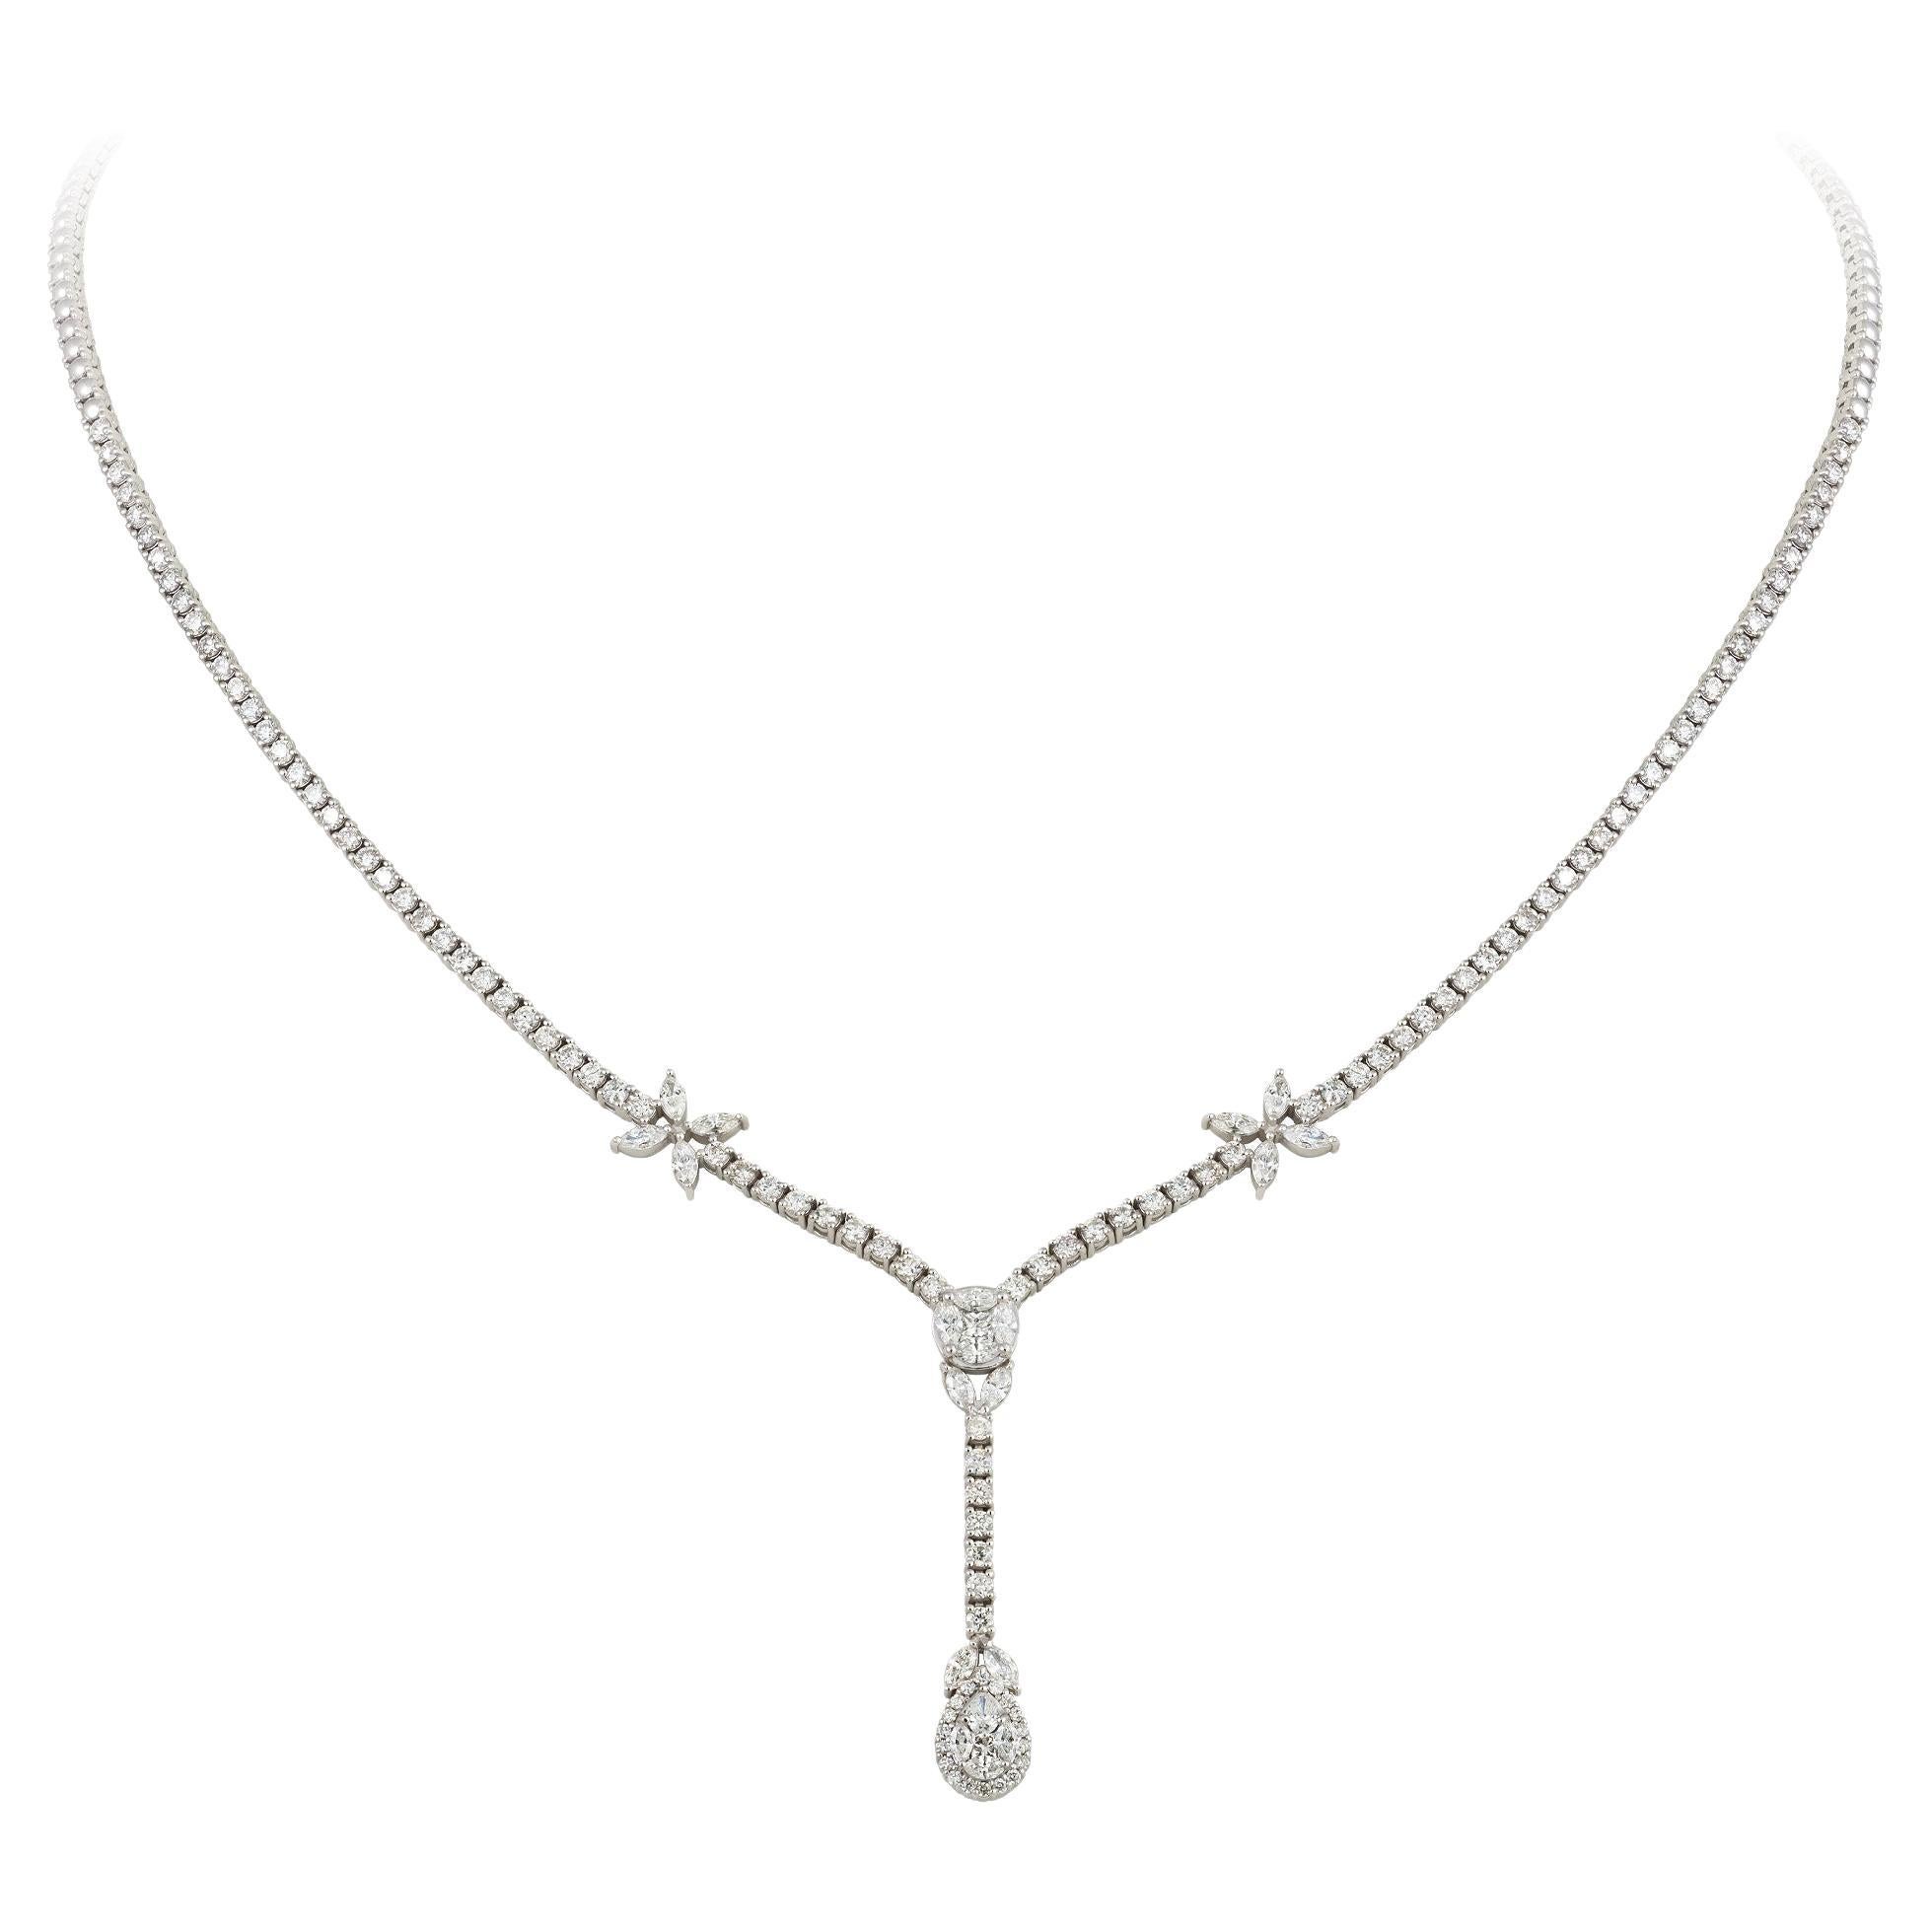 Drop White Gold 18K Necklace Diamond for Her